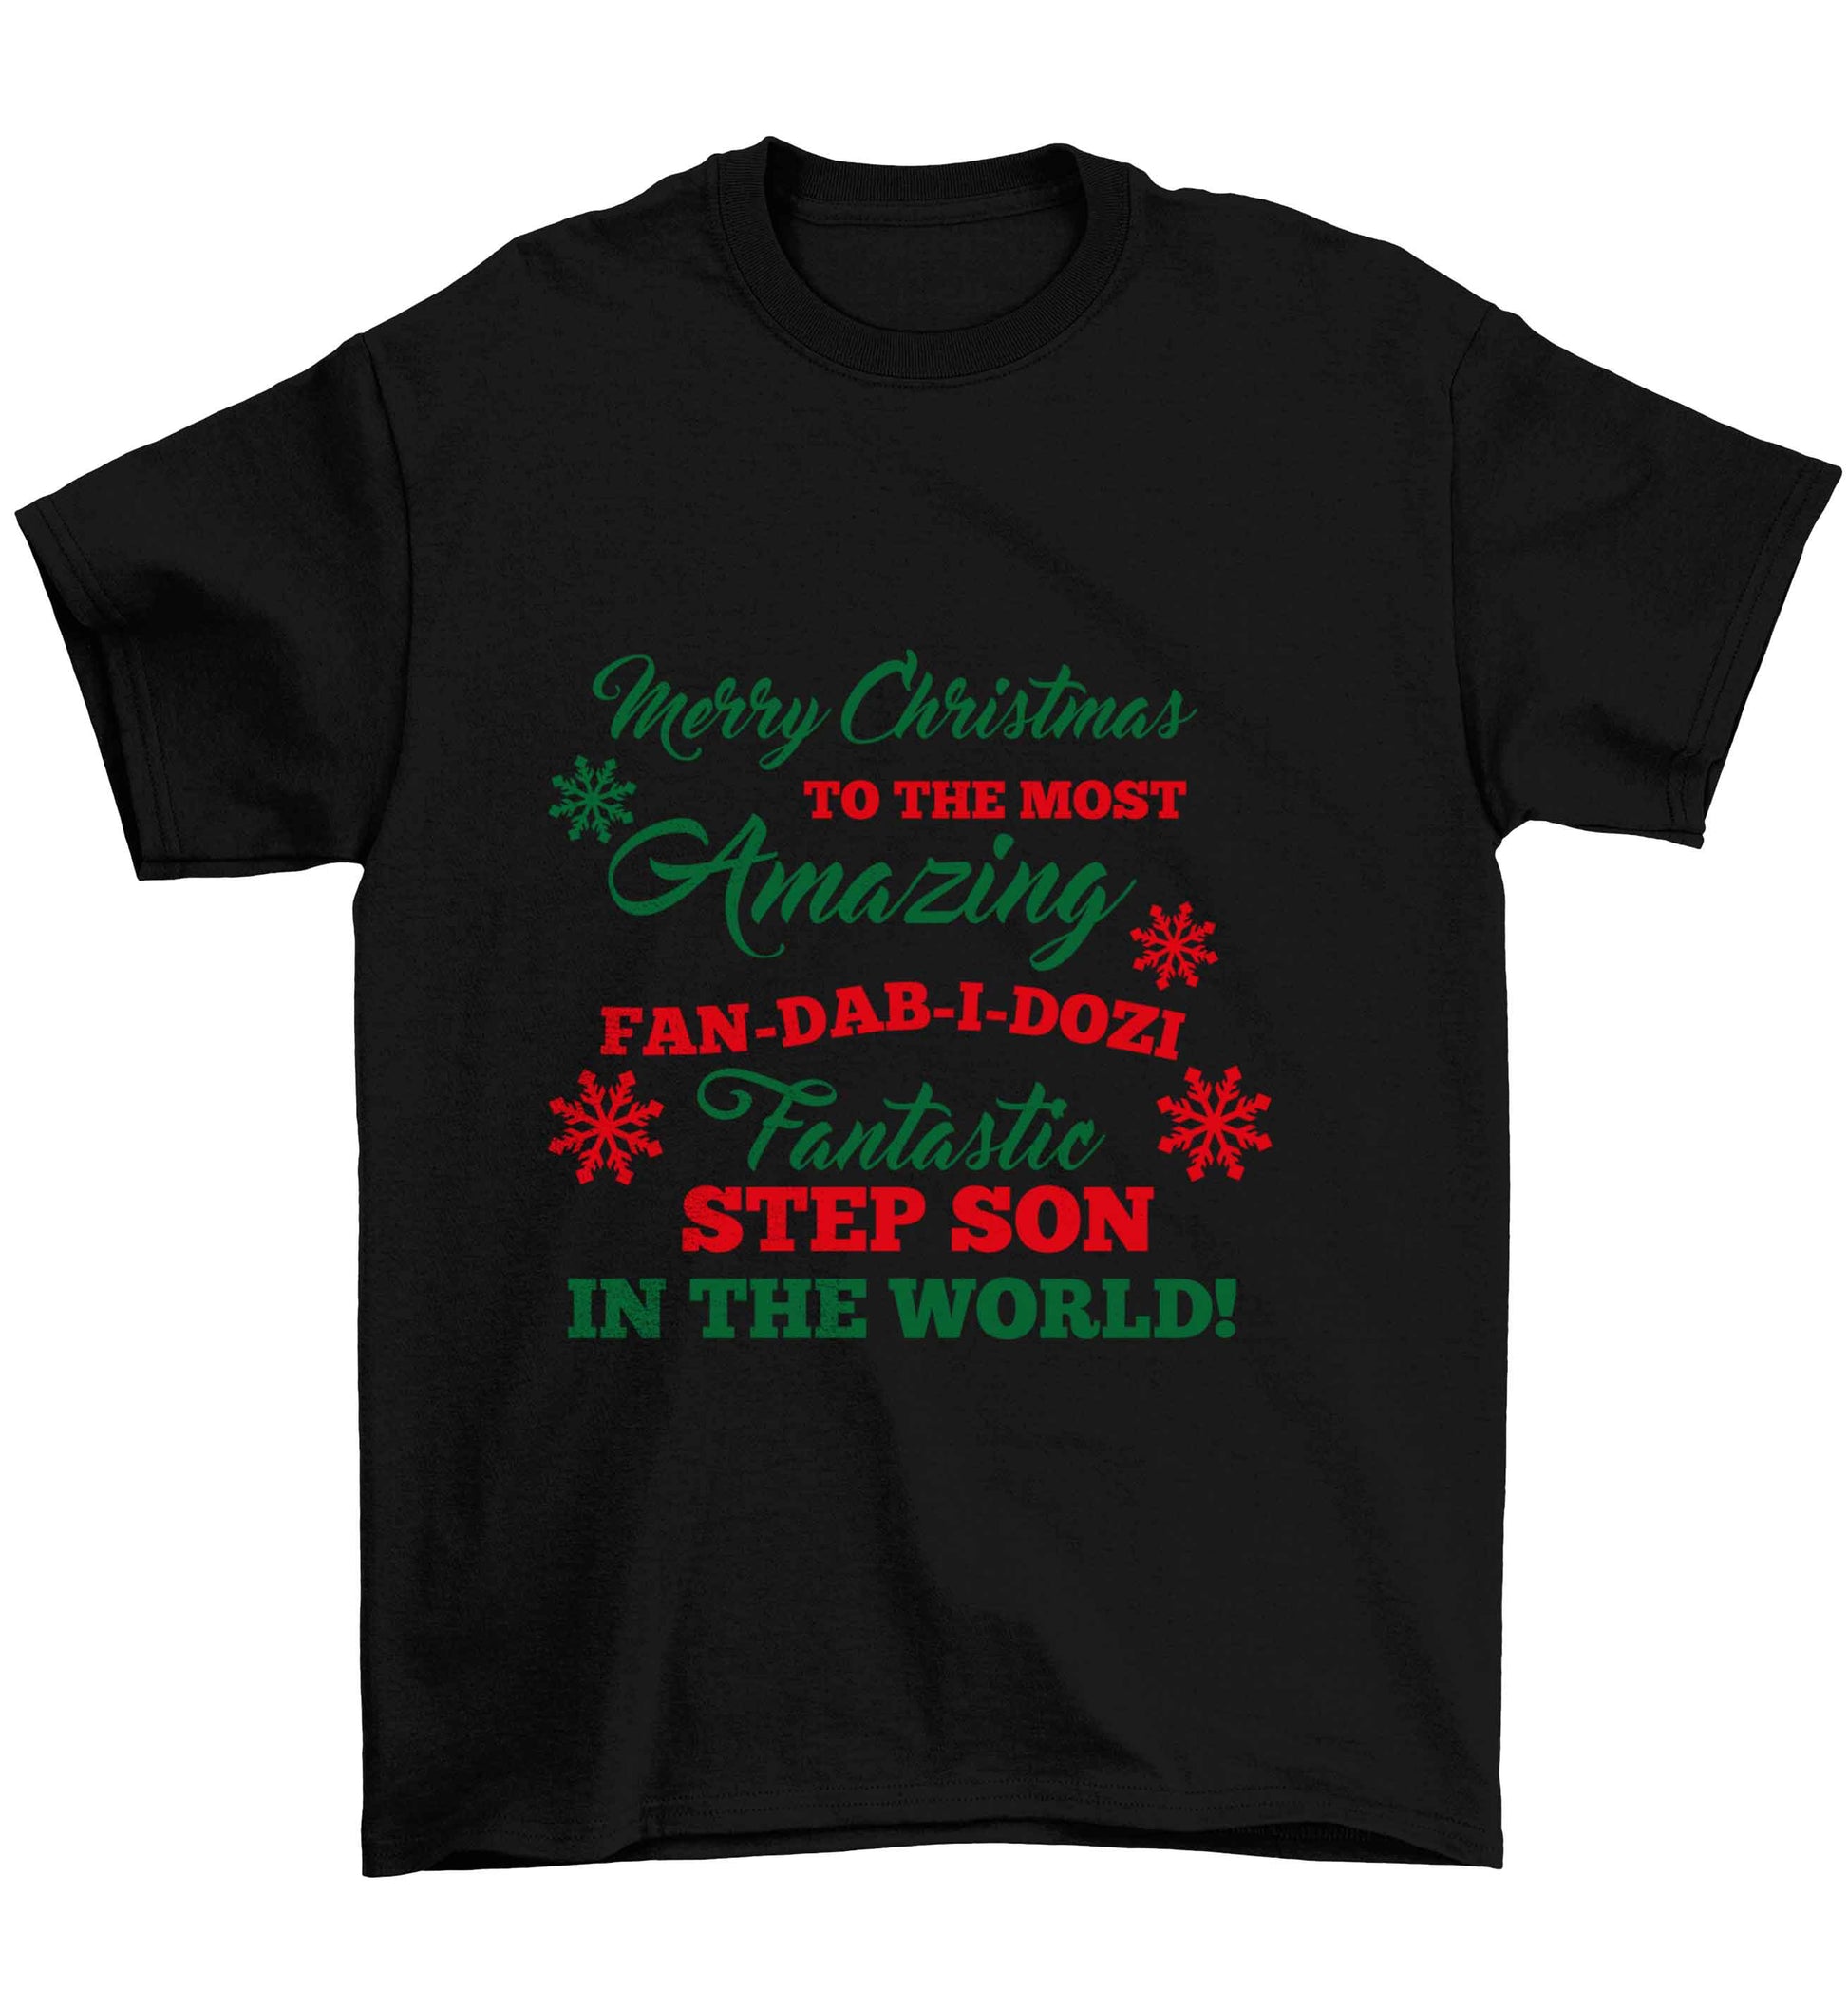 Merry Christmas to the most amazing fan-dab-i-dozi fantasic Step Son in the world Children's black Tshirt 12-13 Years